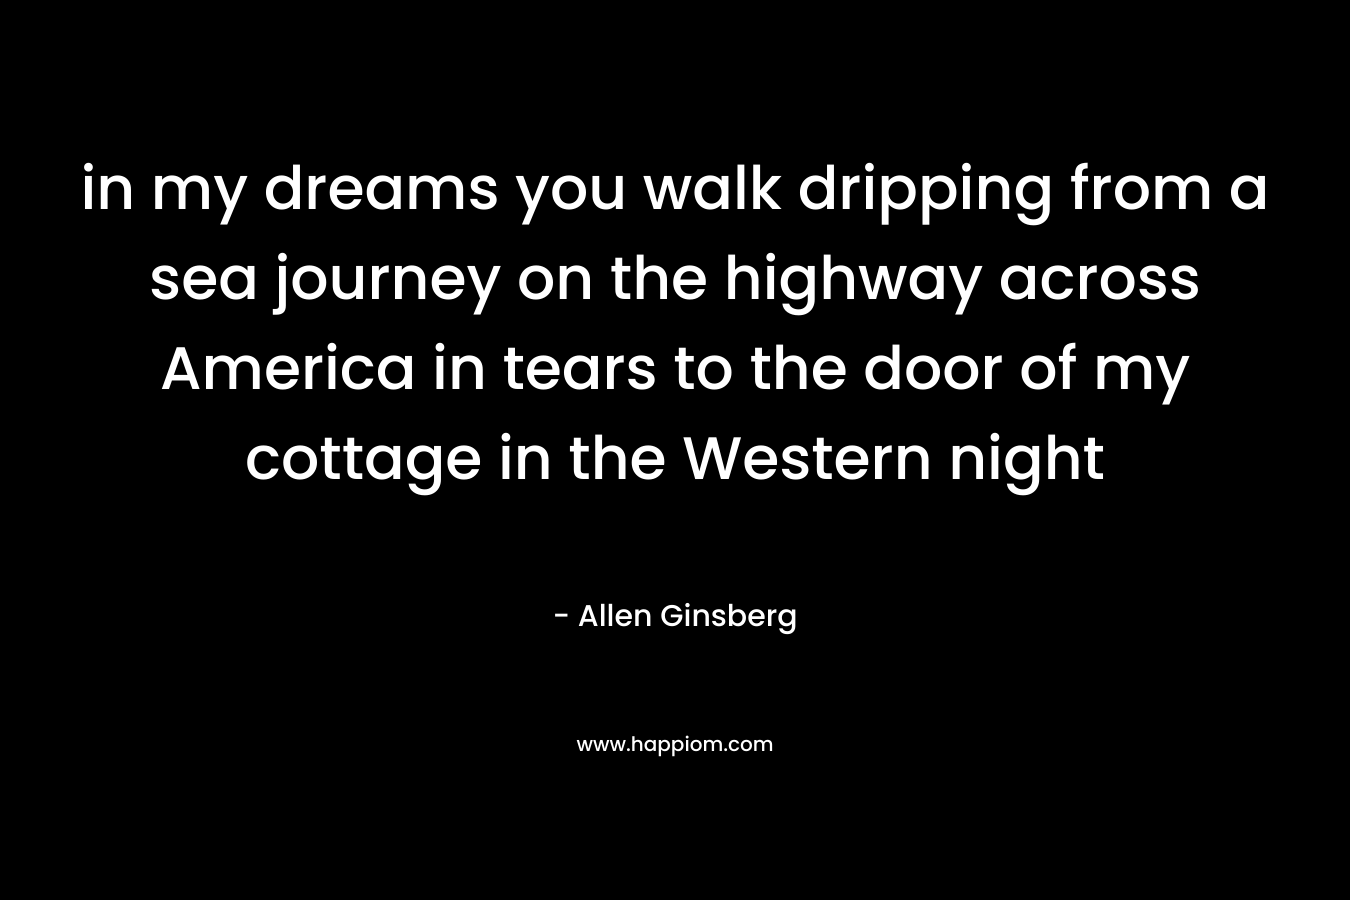 in my dreams you walk dripping from a sea journey on the highway across America in tears to the door of my cottage in the Western night – Allen Ginsberg